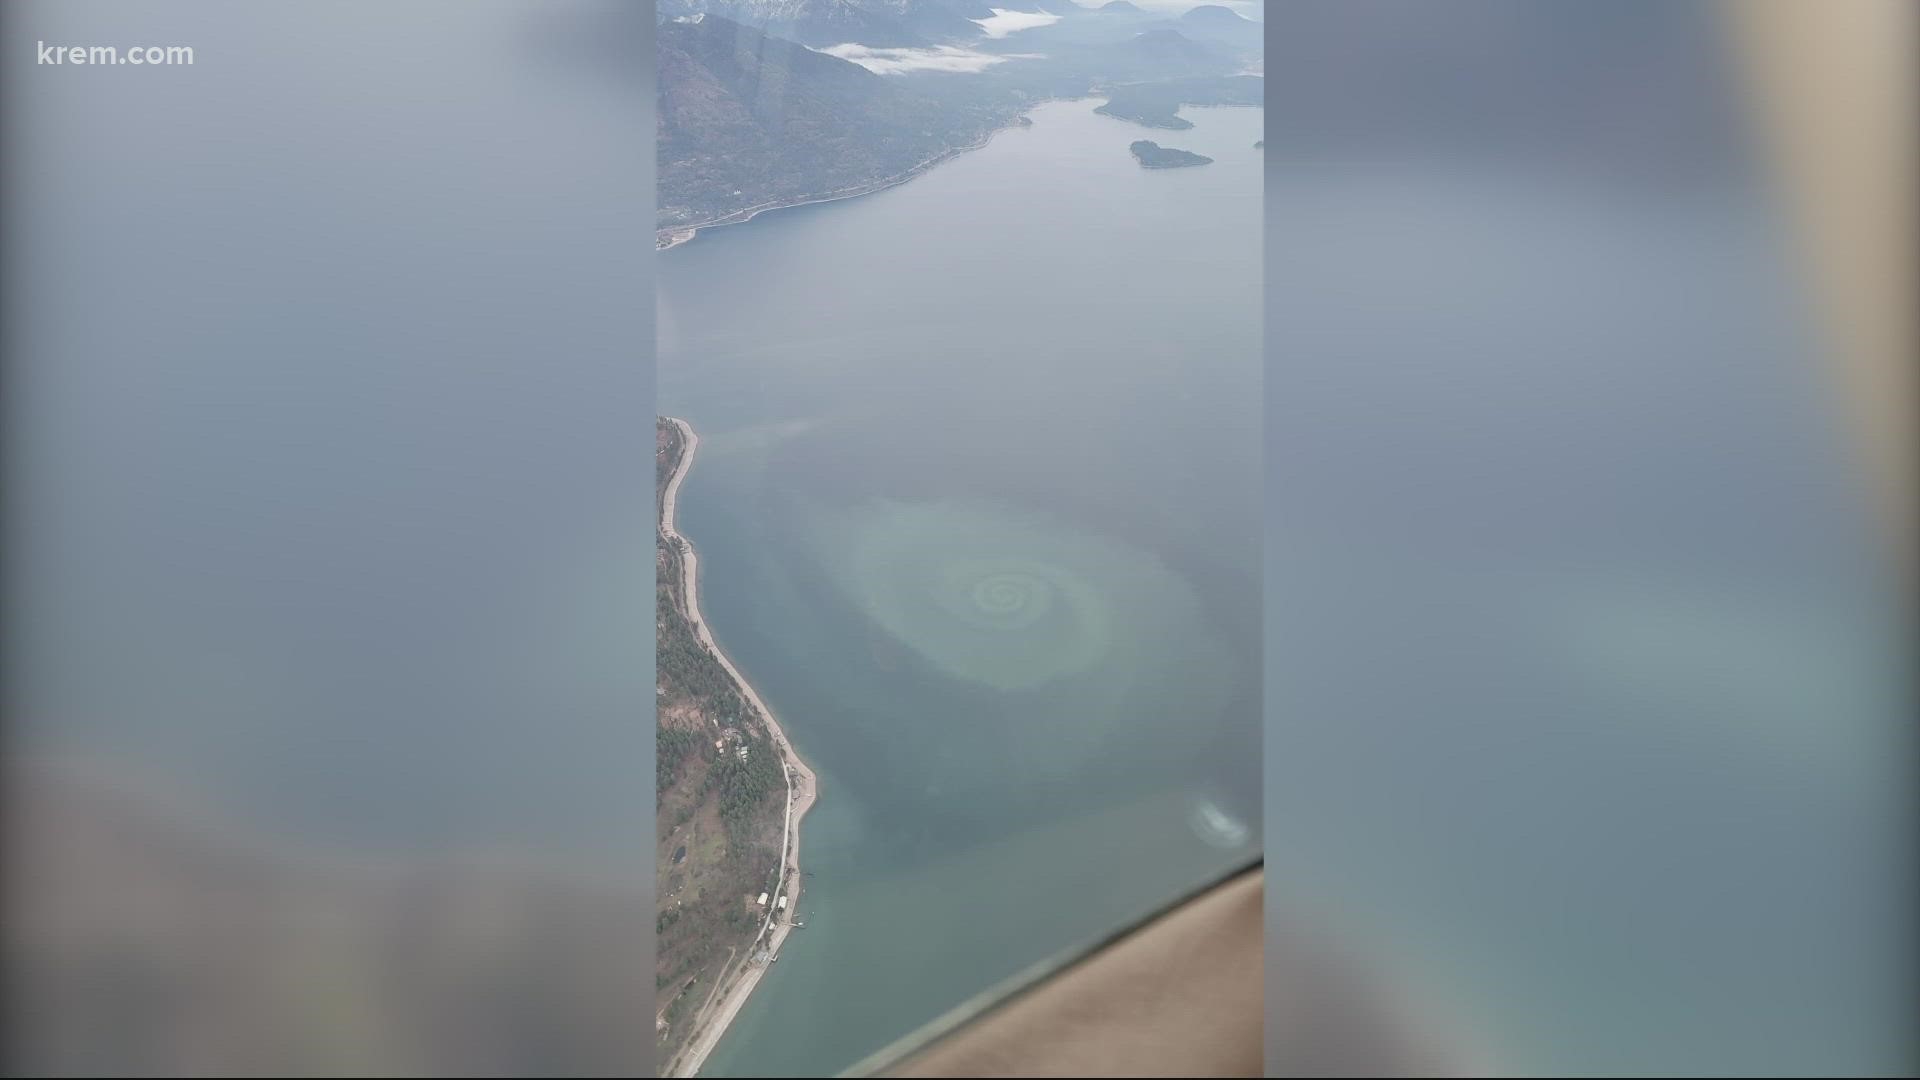 Scientists at University of Idaho believe the swirl is suspended sediment that got swept into the current.